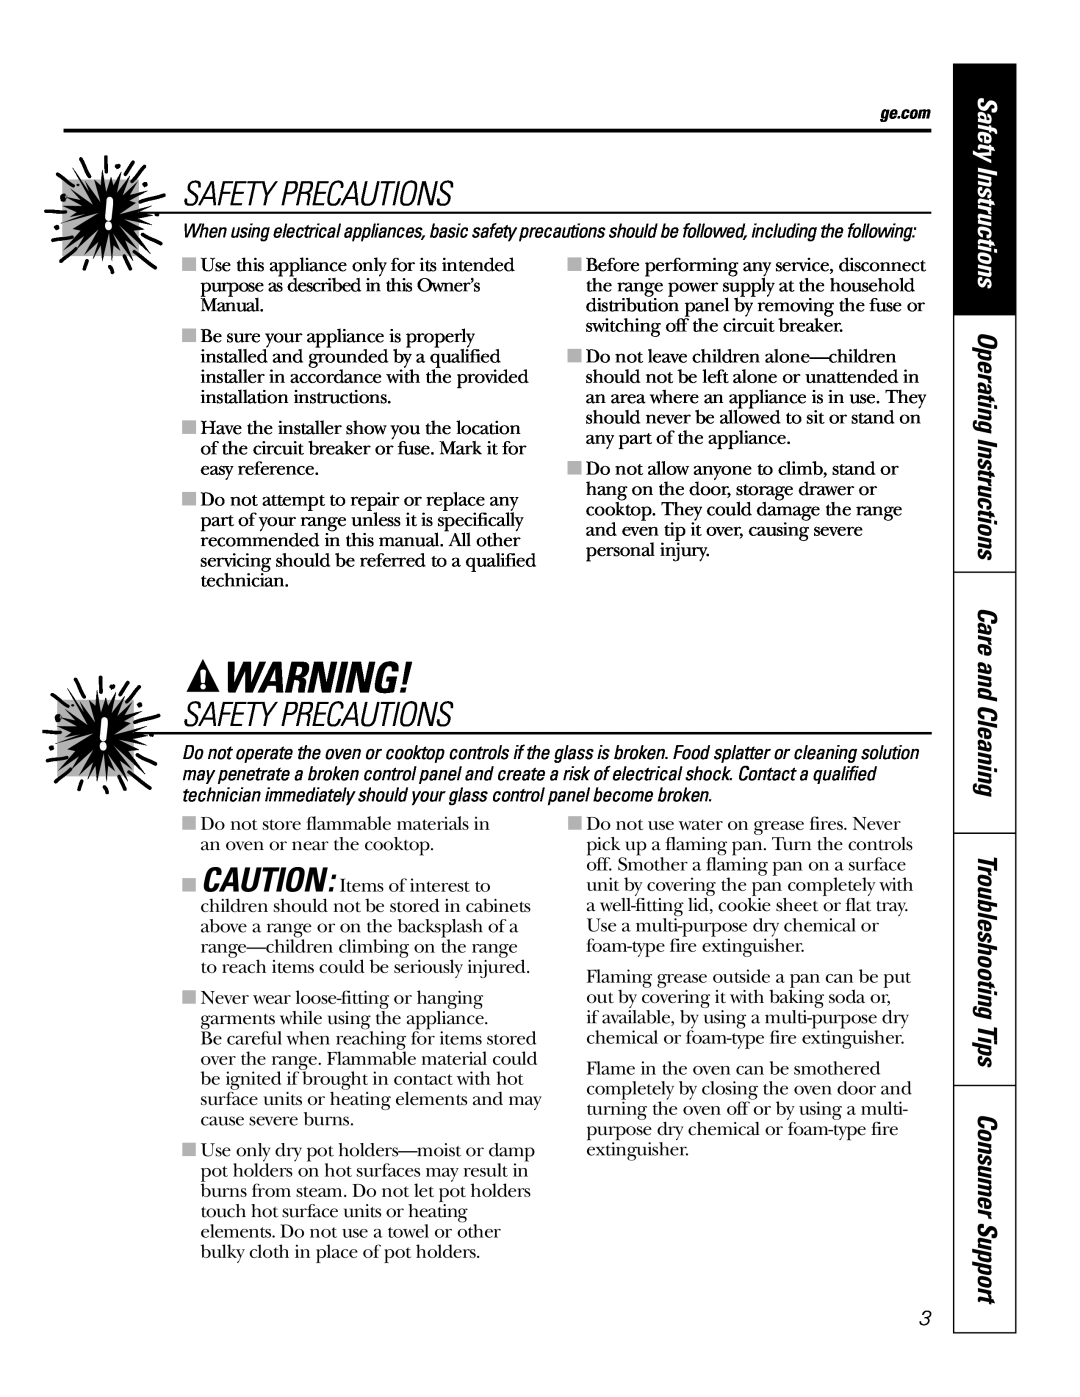 GE JB670, JB645, JB680 owner manual Safety Precautions, Safety Instructions OperatingInstructions Care and Cleaning 